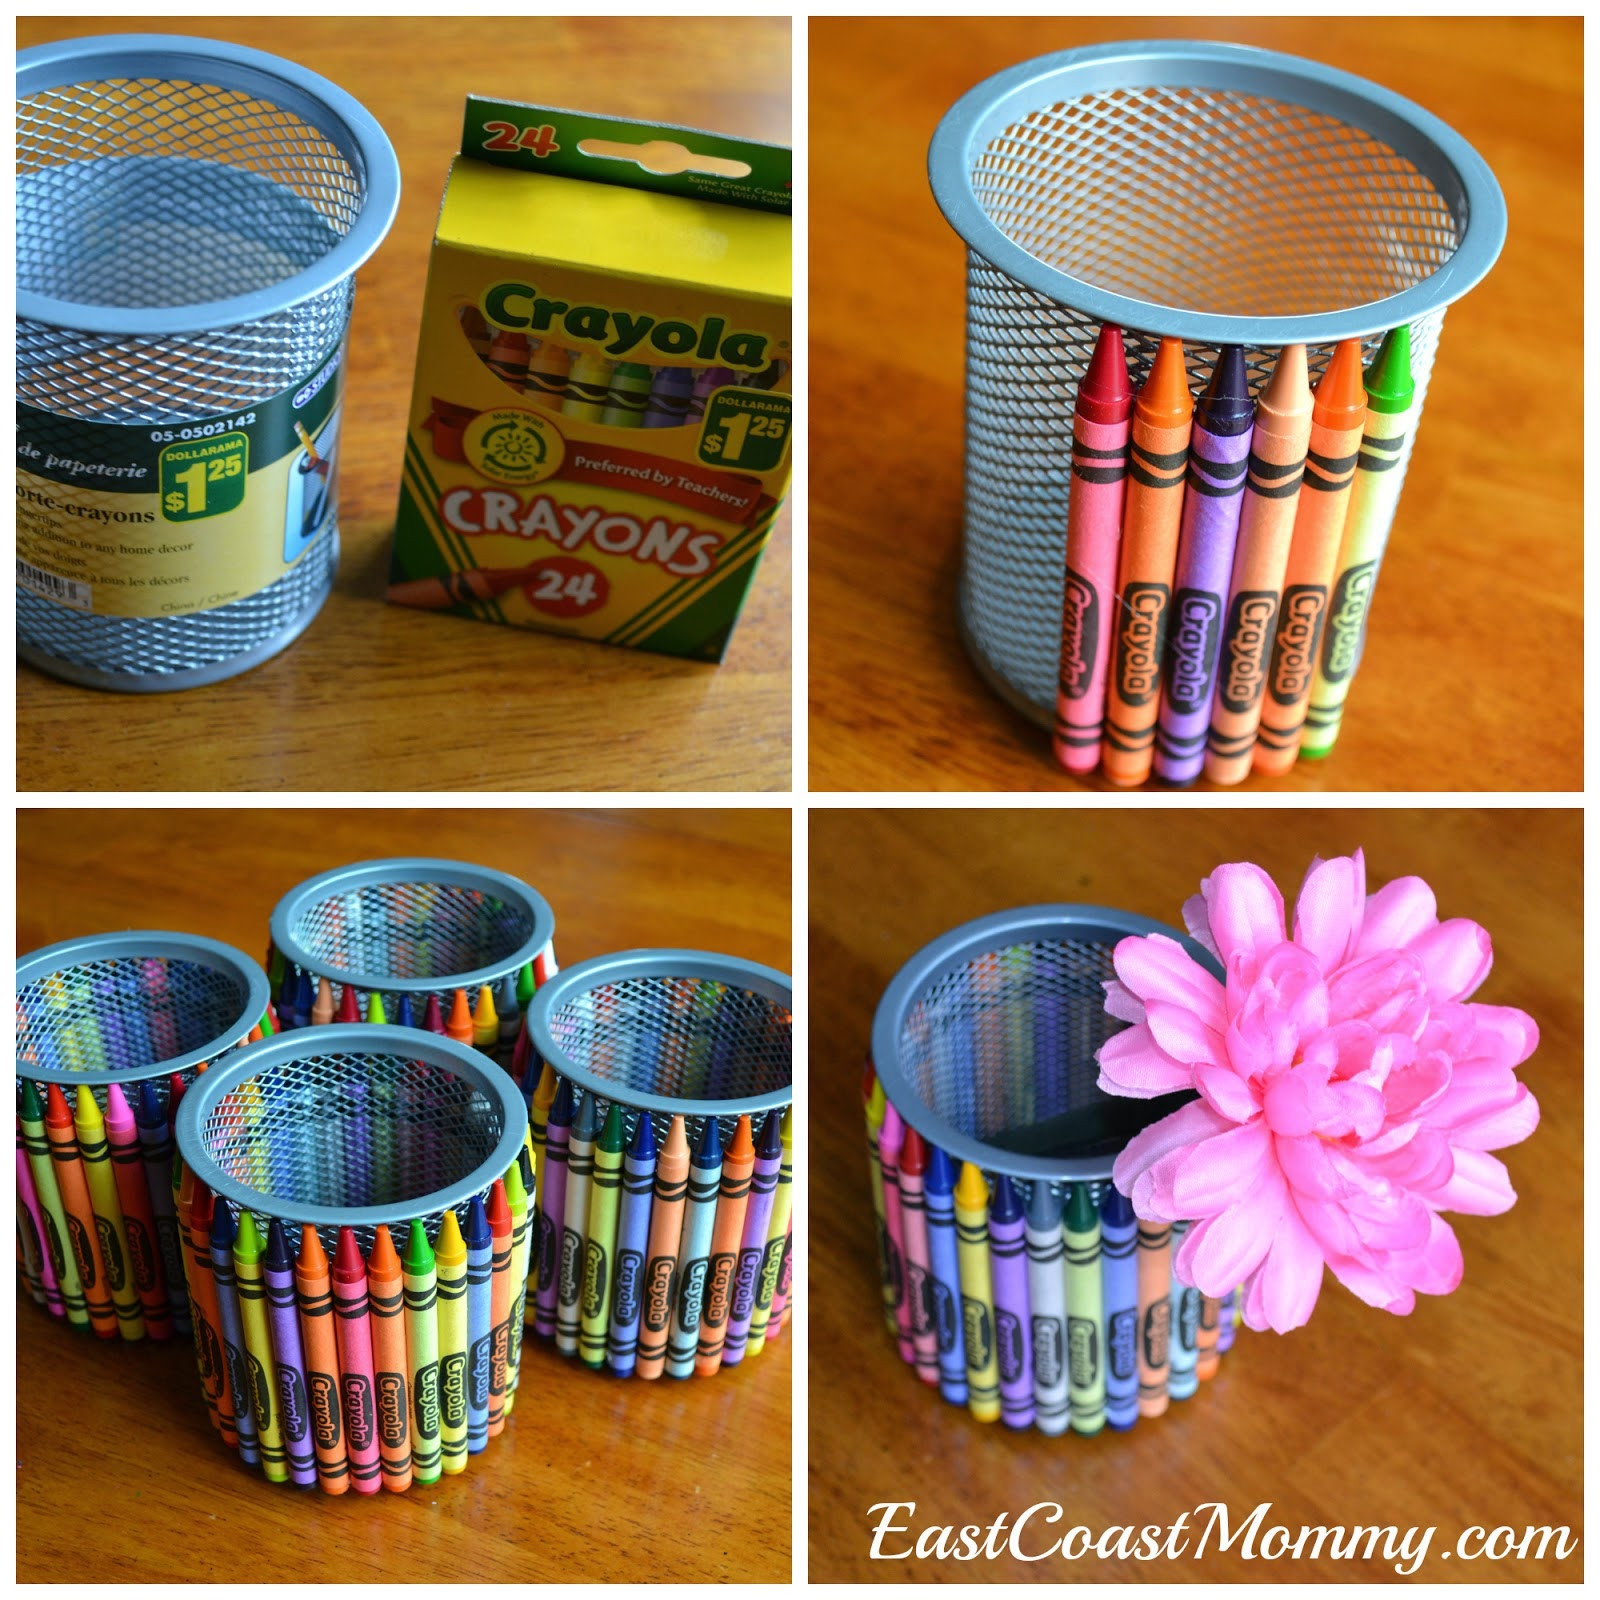 Best ideas about Teacher Gifts DIY
. Save or Pin East Coast Mommy DIY Teacher Gifts he or she will love Now.